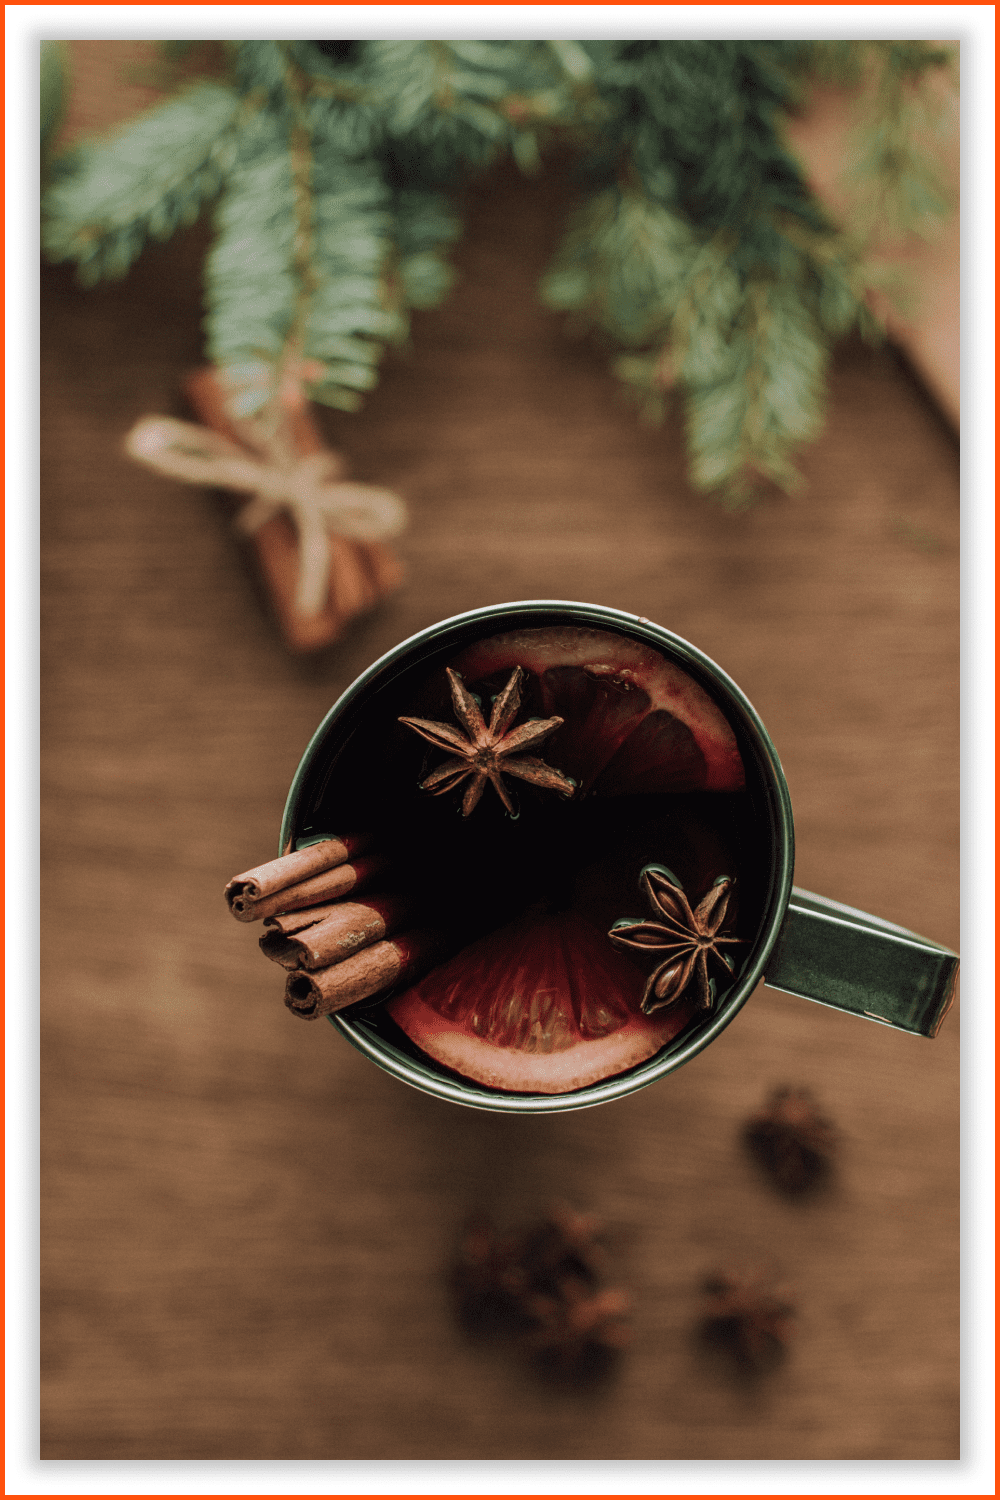 Photo of a Cup of homemade mulled wine with cinnamon sticks on a wooden tabletop.